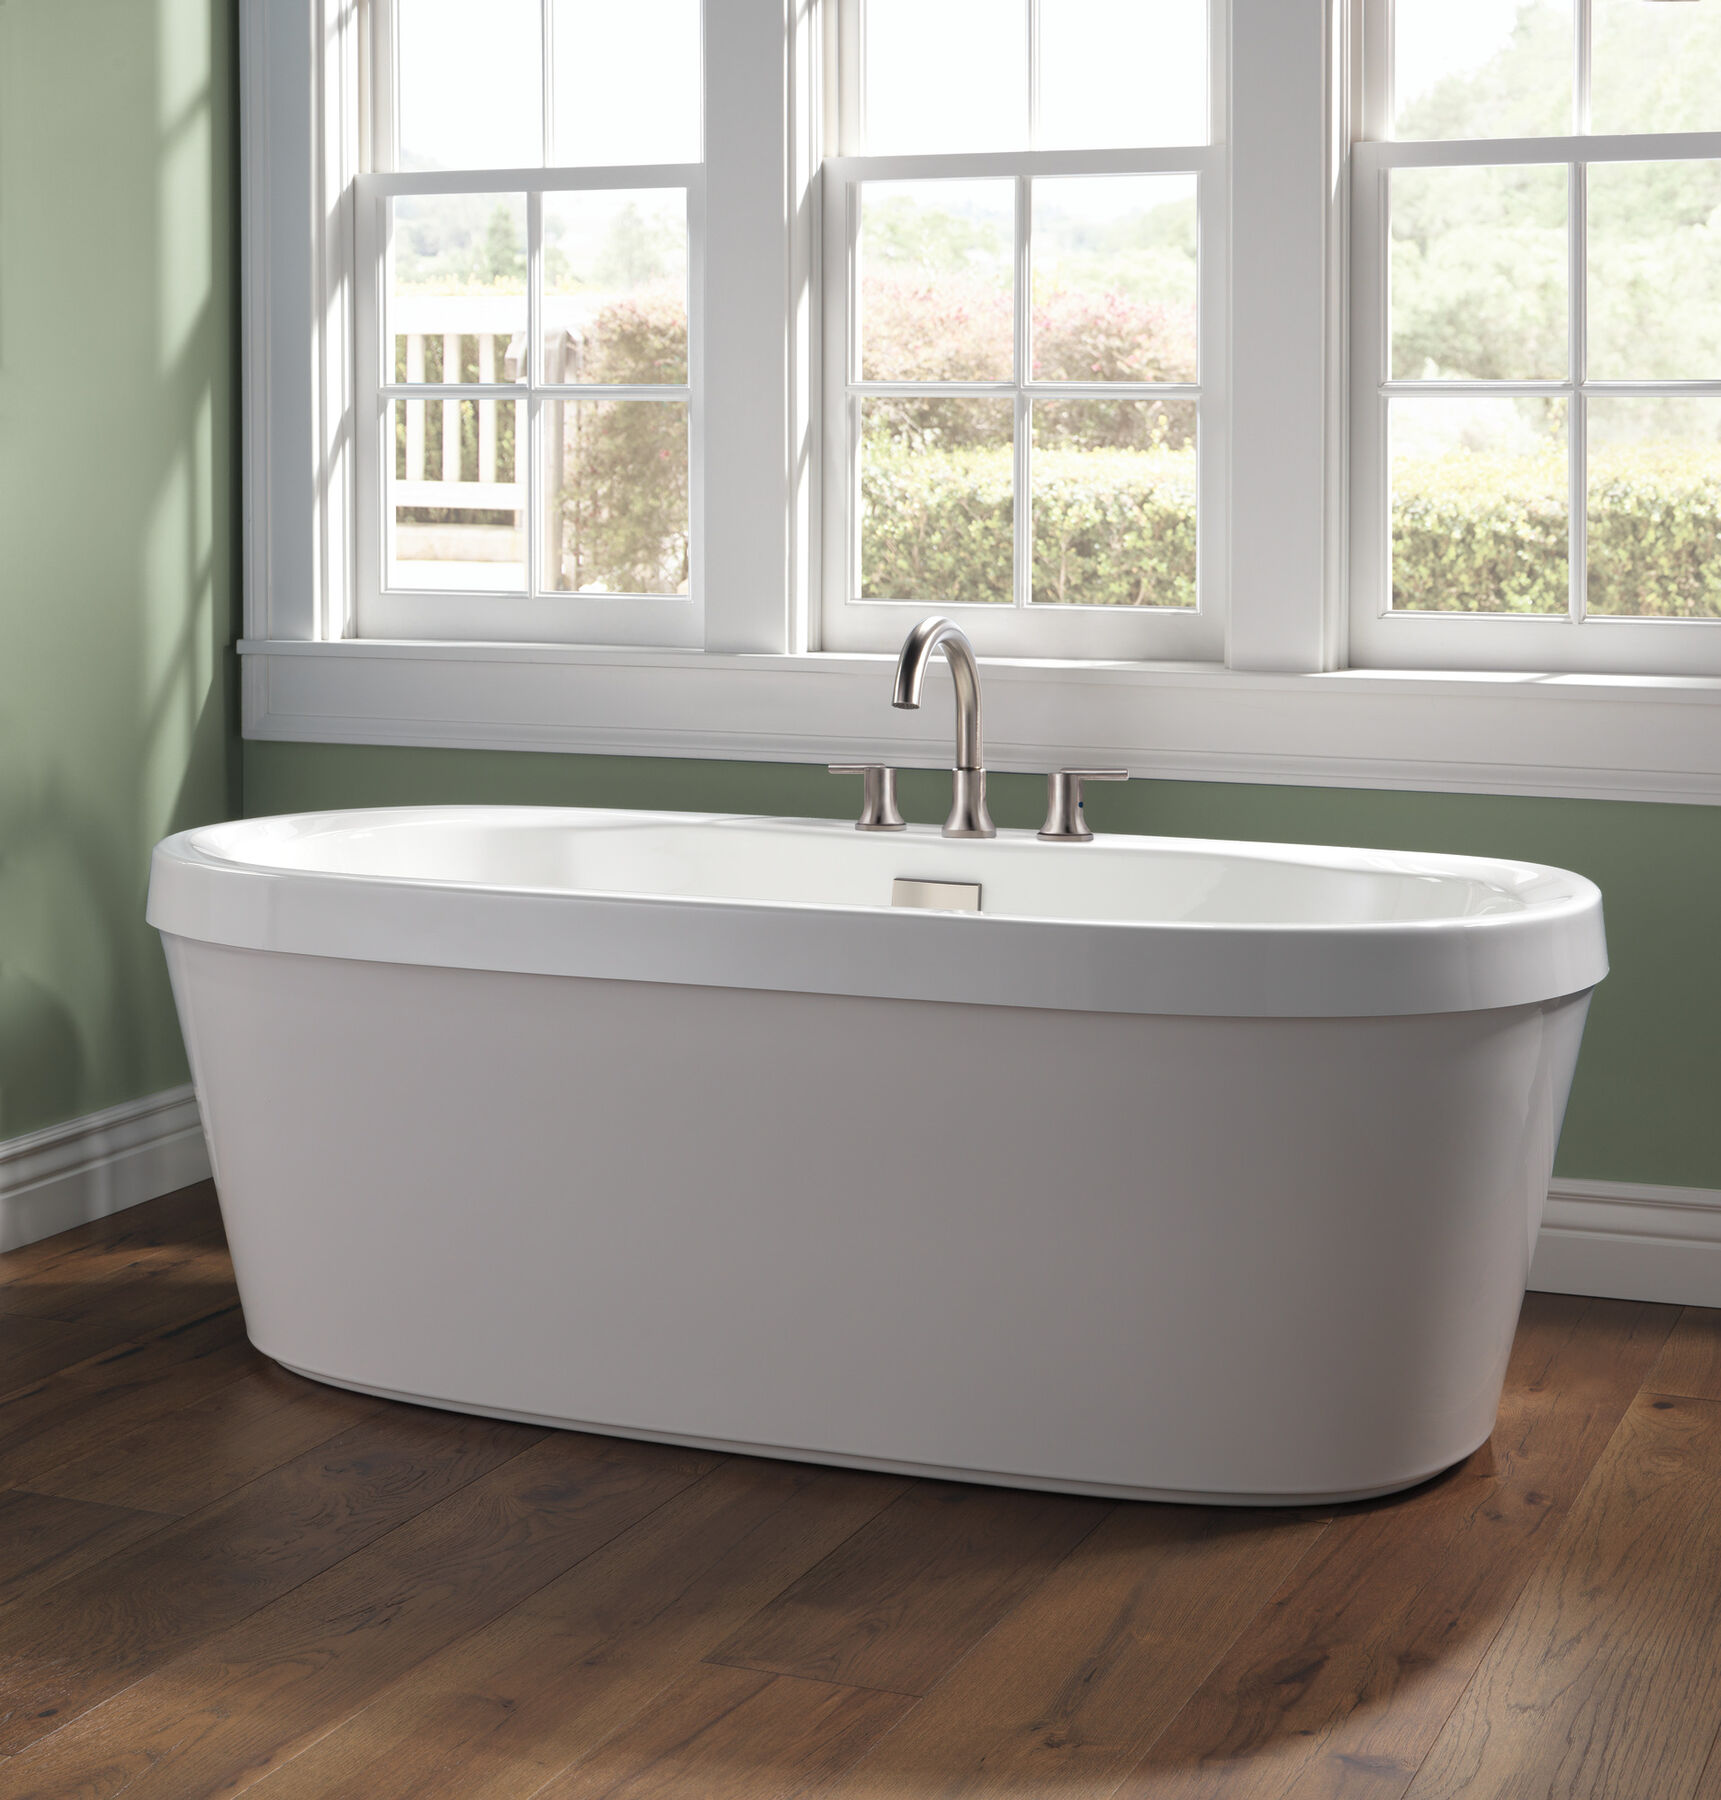 Apollo 1685 x 800mm Twin Skinned Double Ended Freestanding Bath